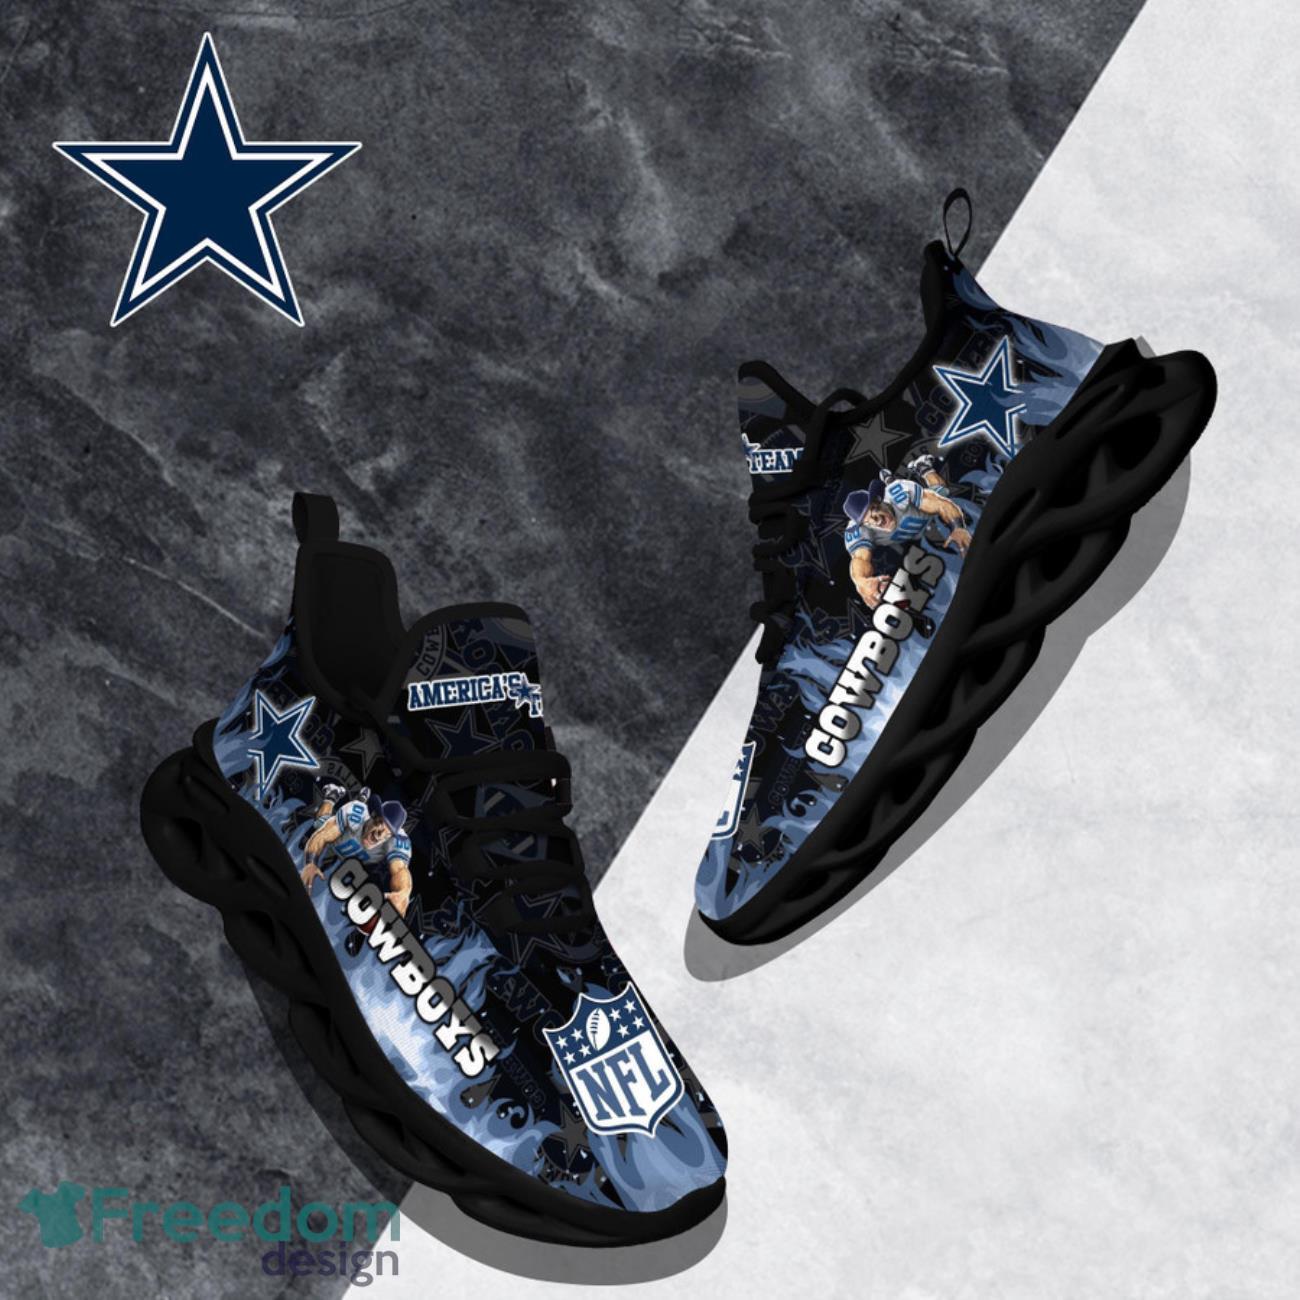 Dallas Cowboys NFL Clunky Max Soul Shoes - Freedomdesign